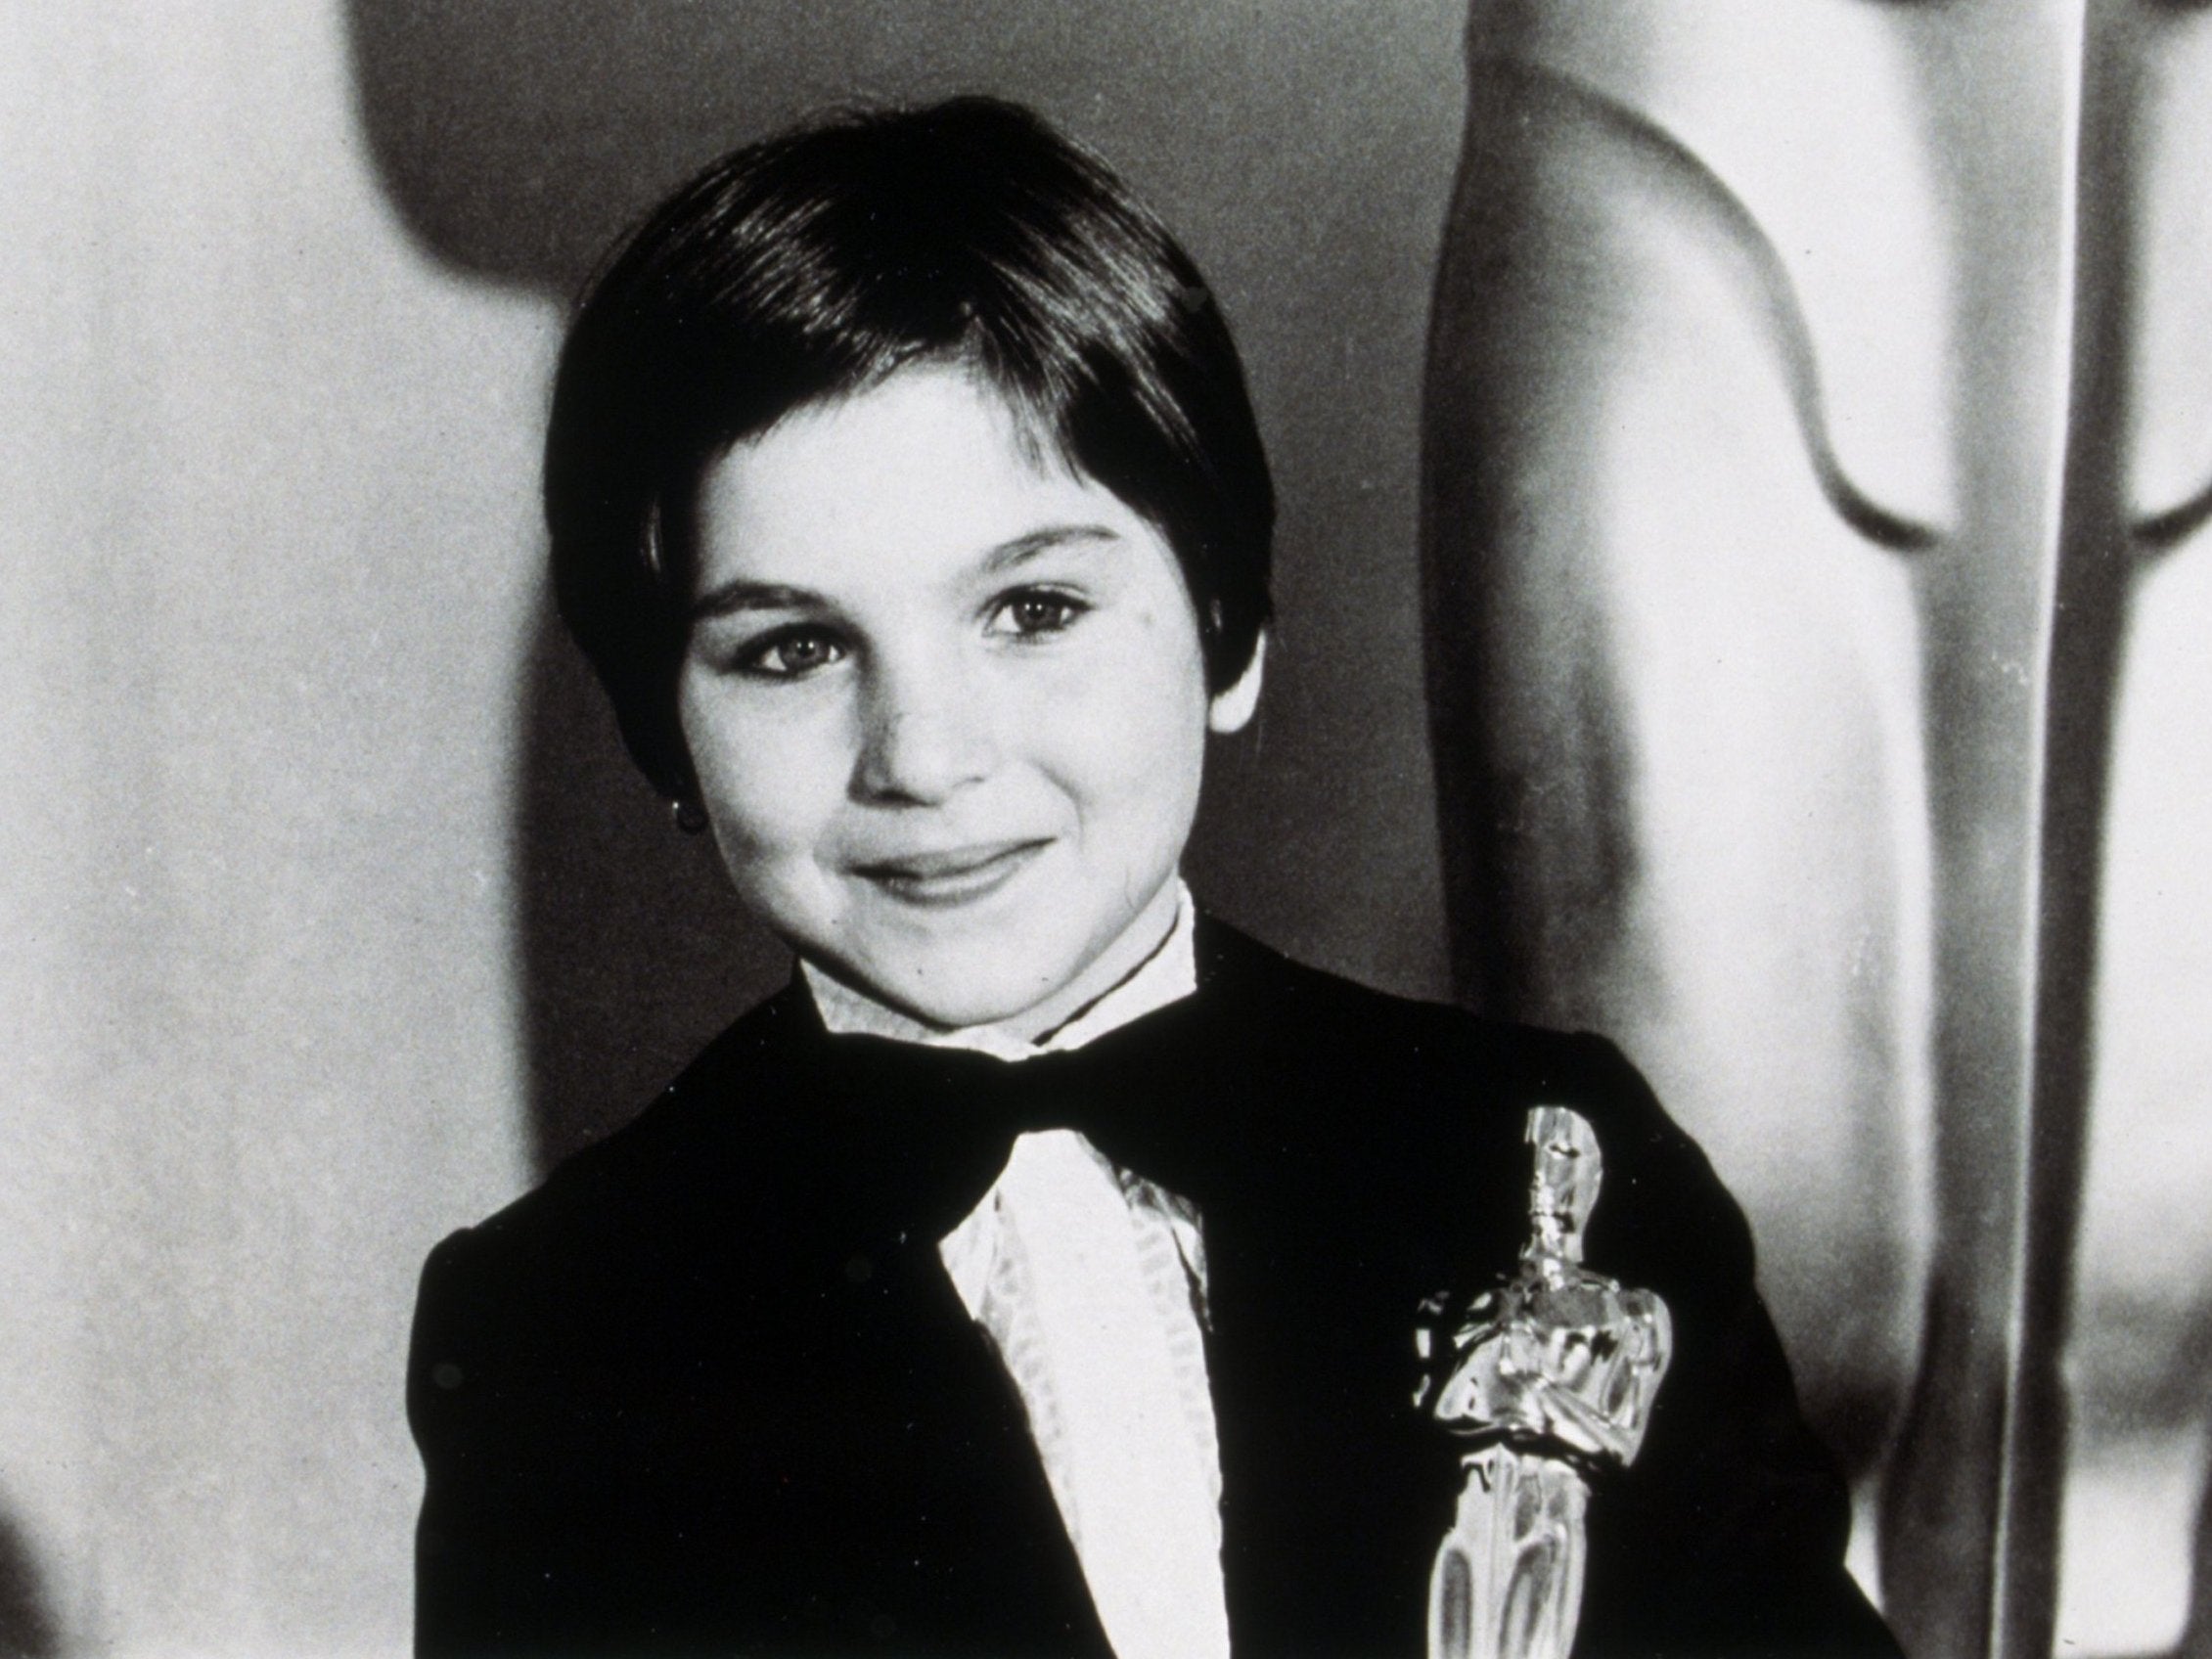 O’Neal became the youngest Oscar winner ever in 1974